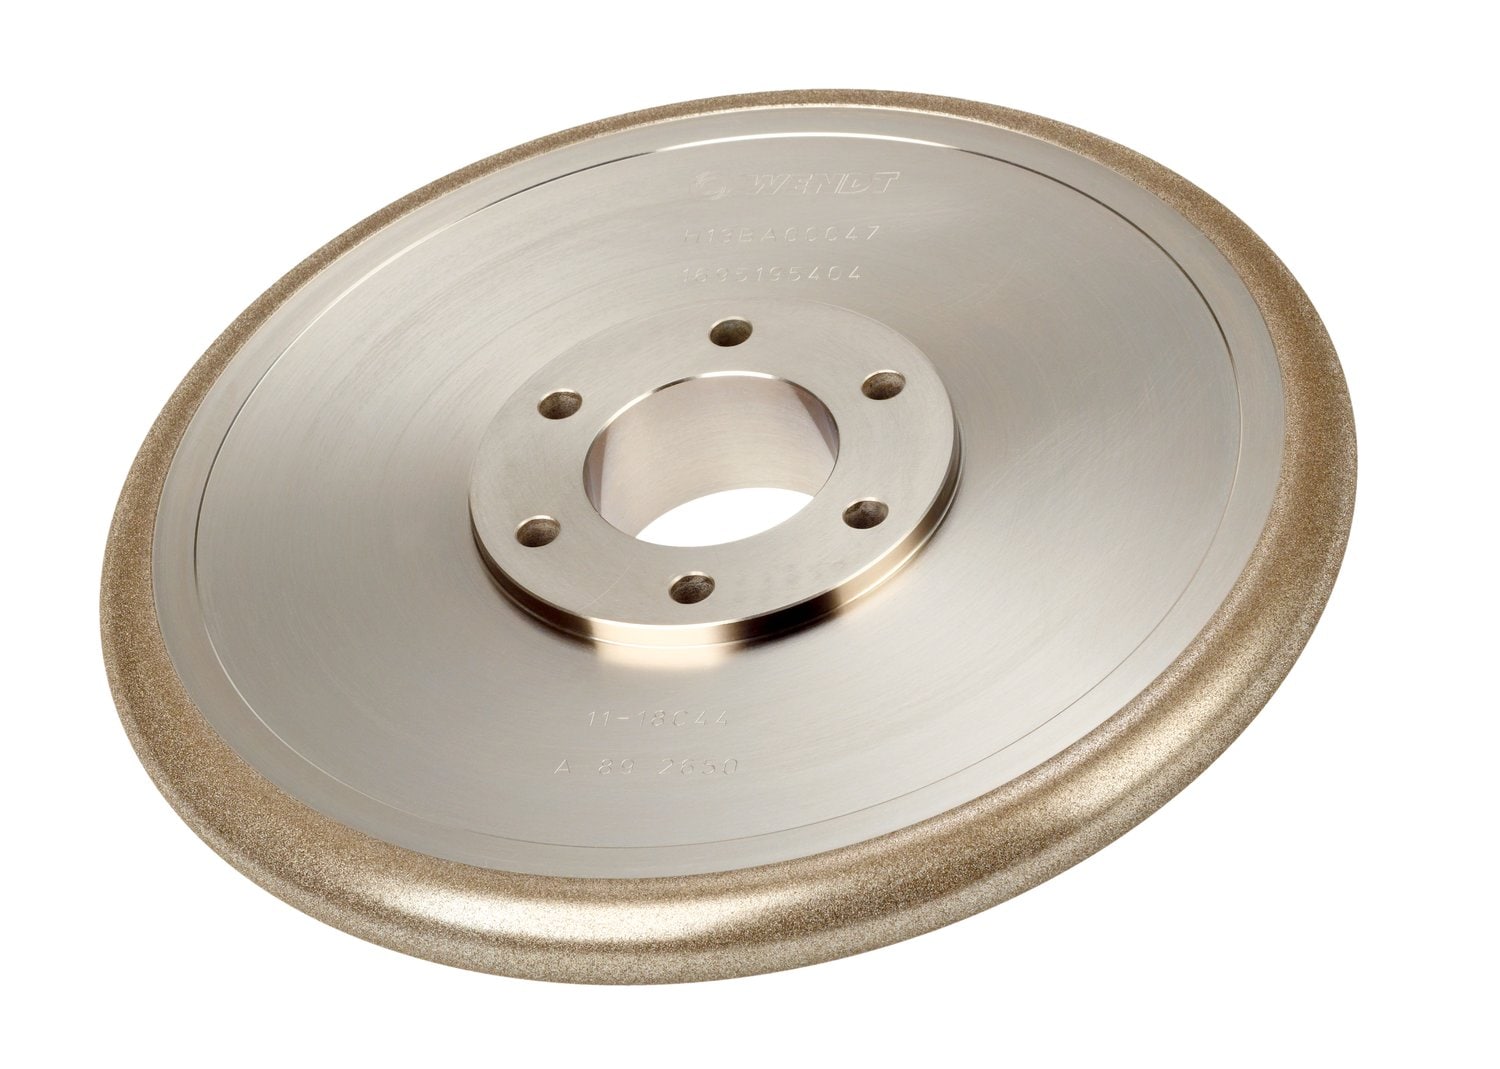 7010488739 - 3M Electroplated CBN Wheels and Tools, H01SZ05294 W6431 DP CBN-R